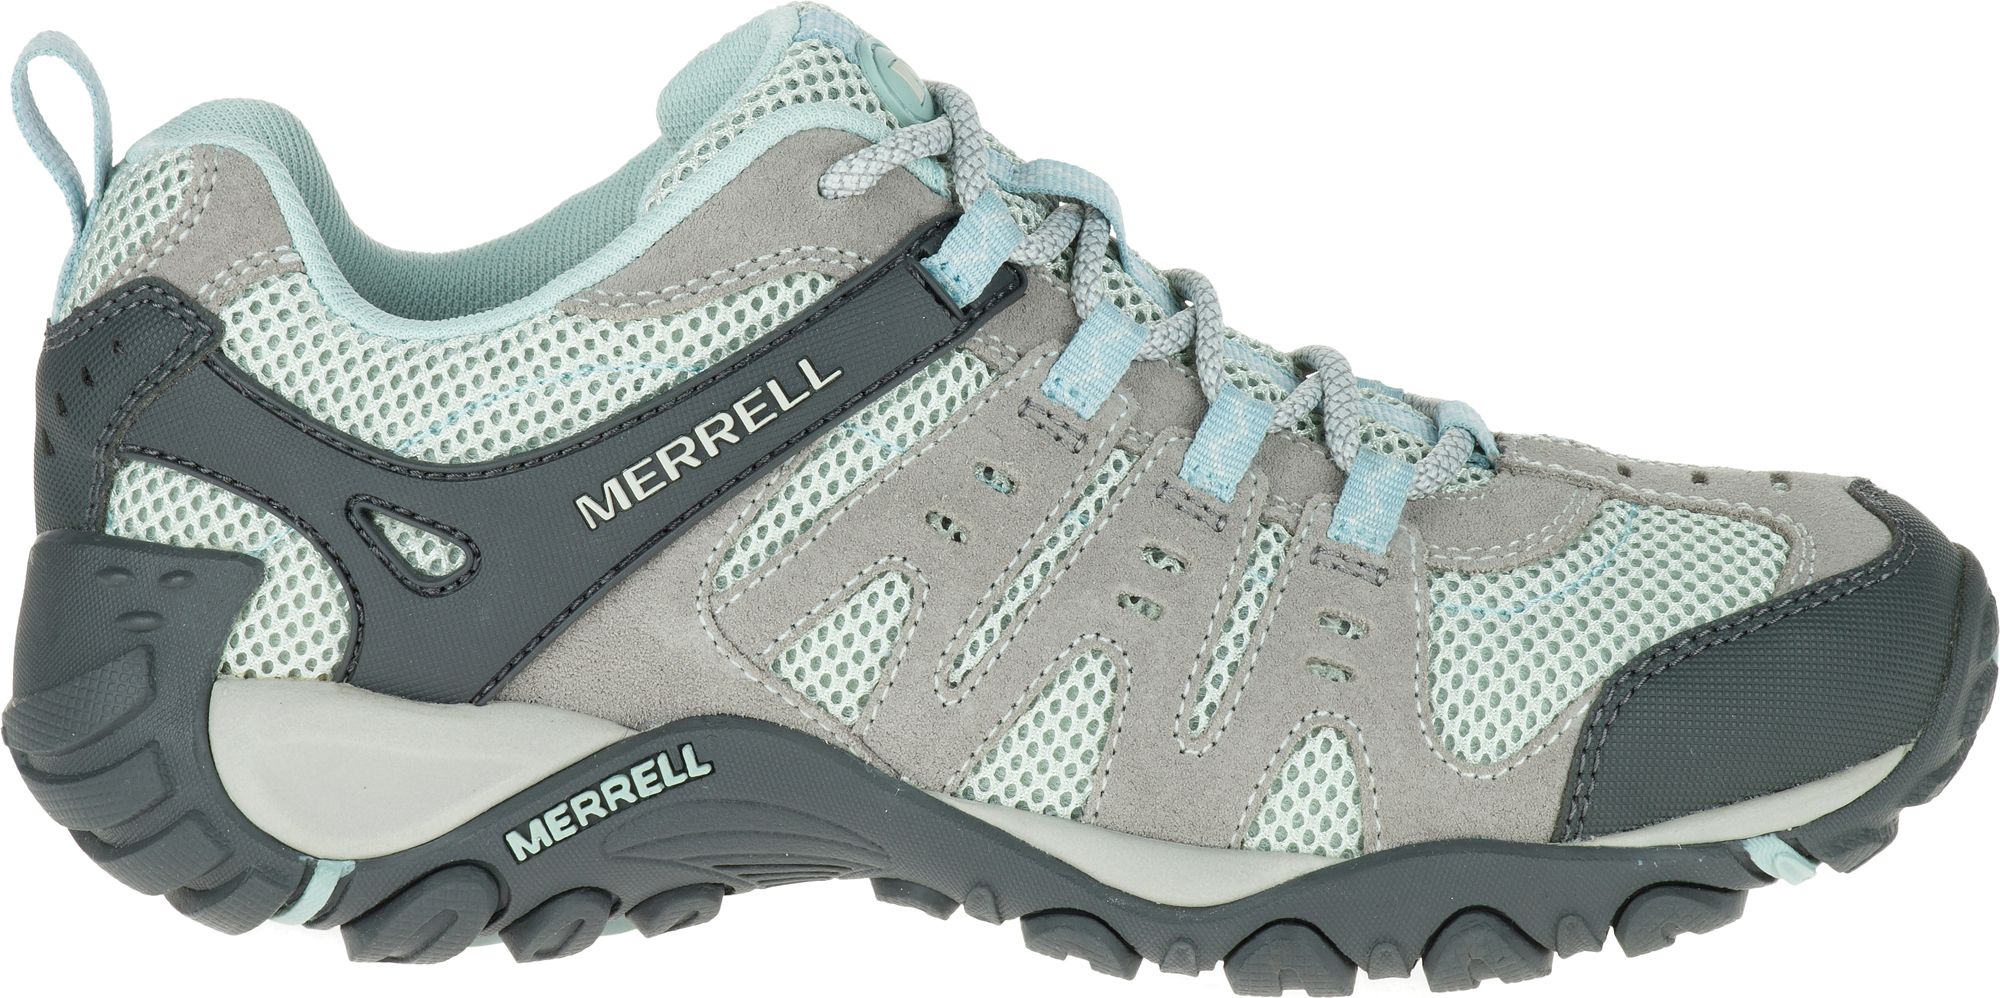 Merrell Women's Accentor Low Hiking Shoes | DICK'S Sporting Goods